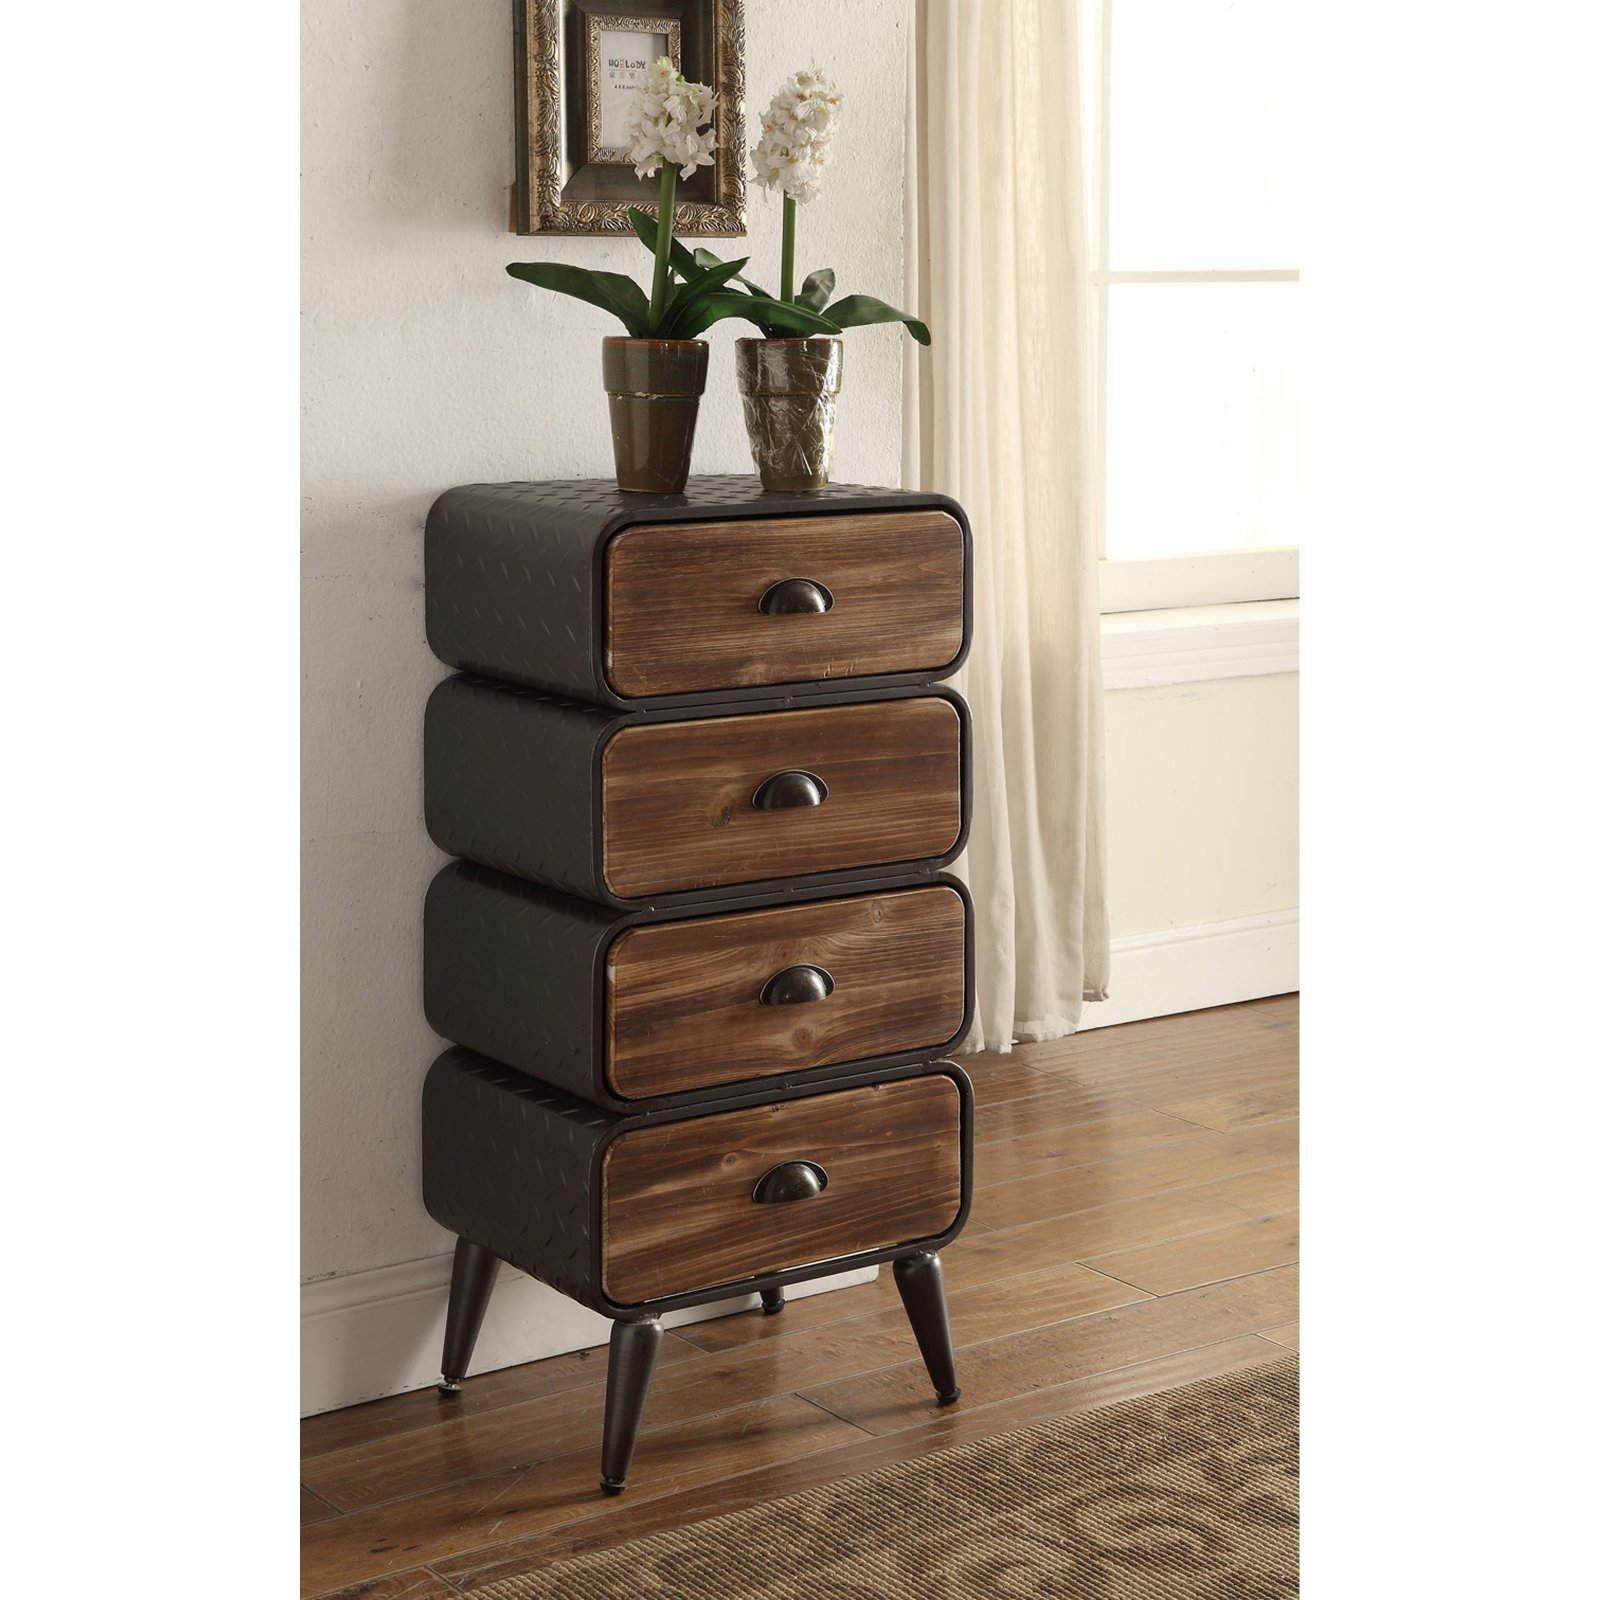 Urban loft 4 Rounded Drawer Chest - image 1 of 11